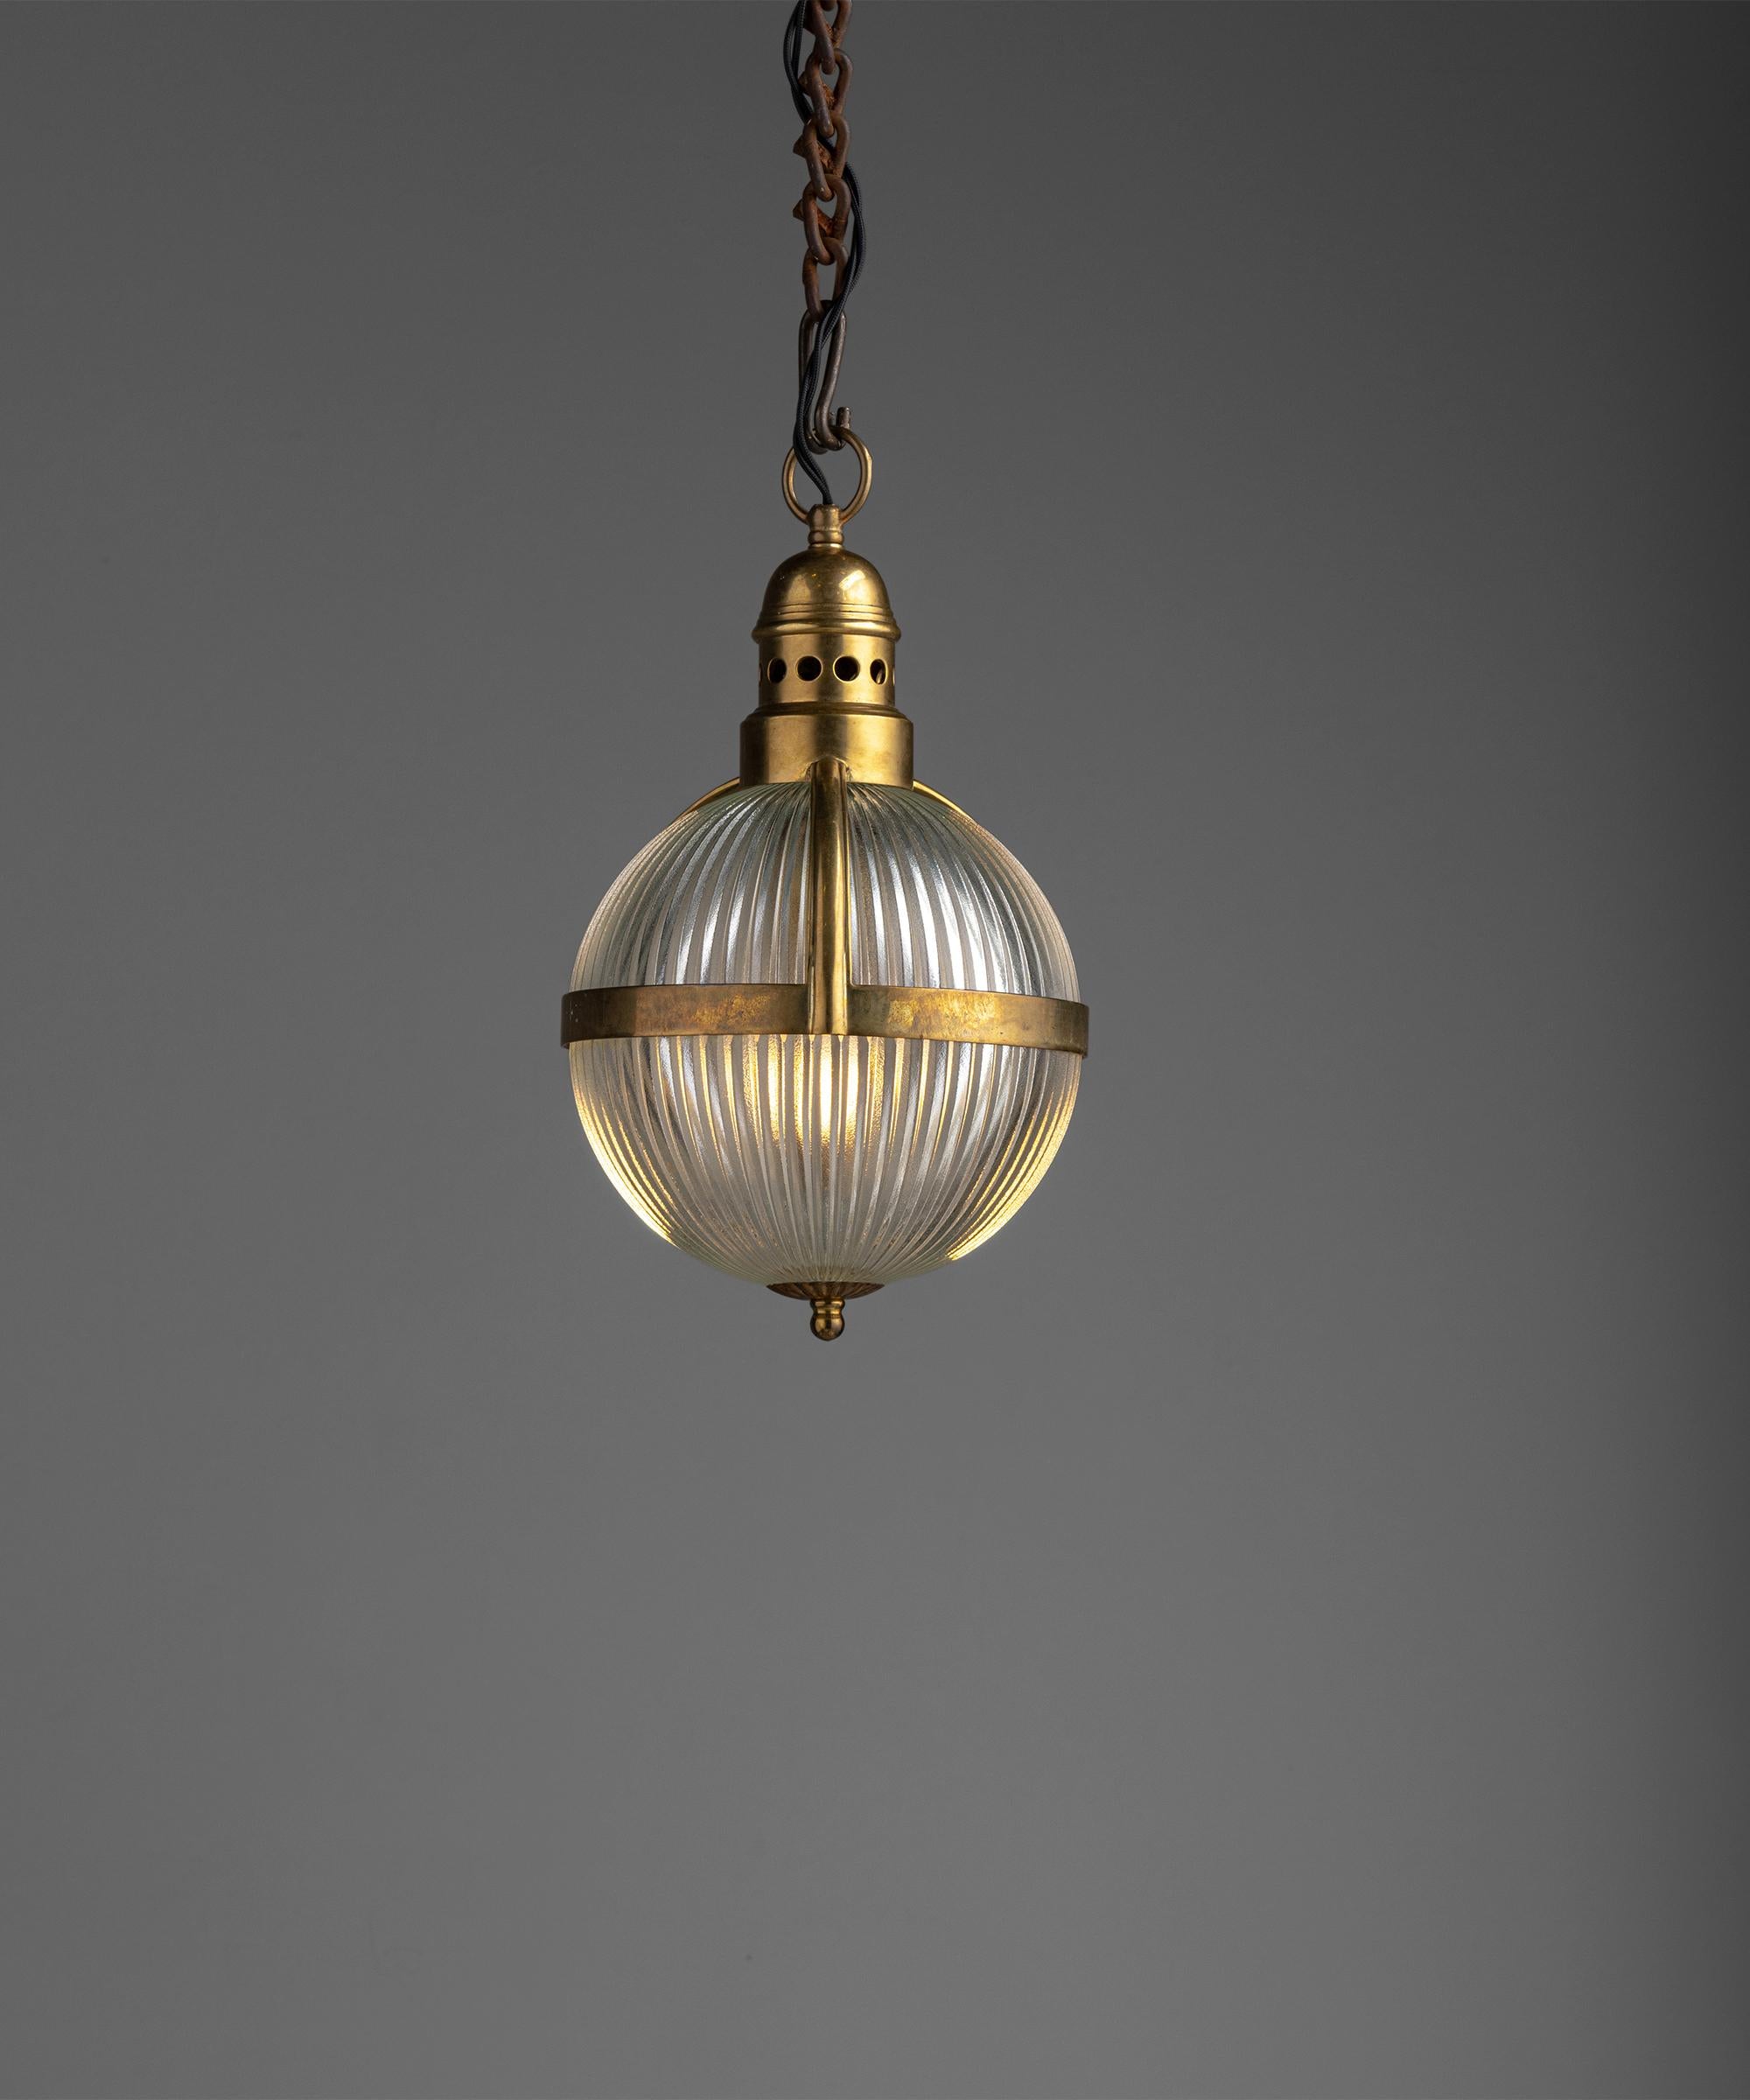 Small Holophane globe pendant.

England, circa 1950

Two-part Holophane fixtures with brass cage and fitter.